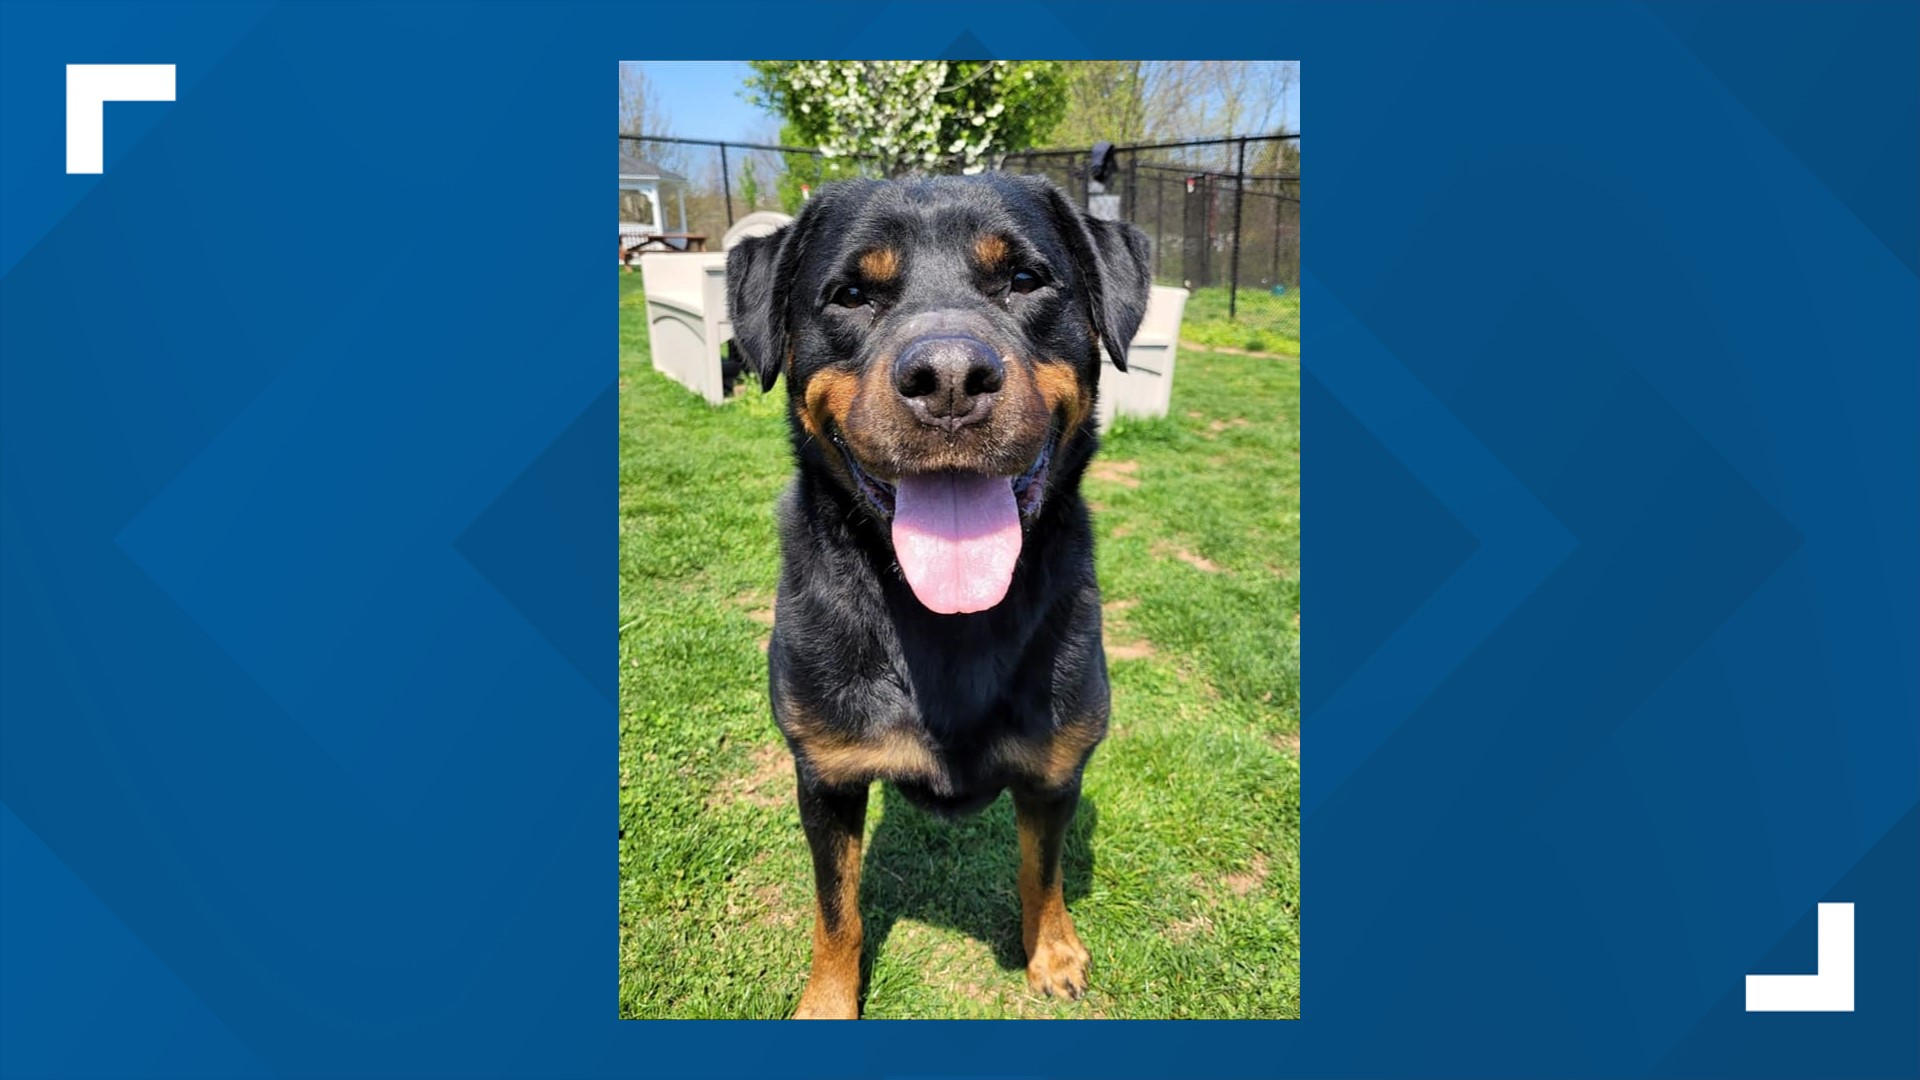 This week's Furry Friend is brought to us by the York County SPCA. Gretel is their longest-term canine resident and has been in the shelter since January.